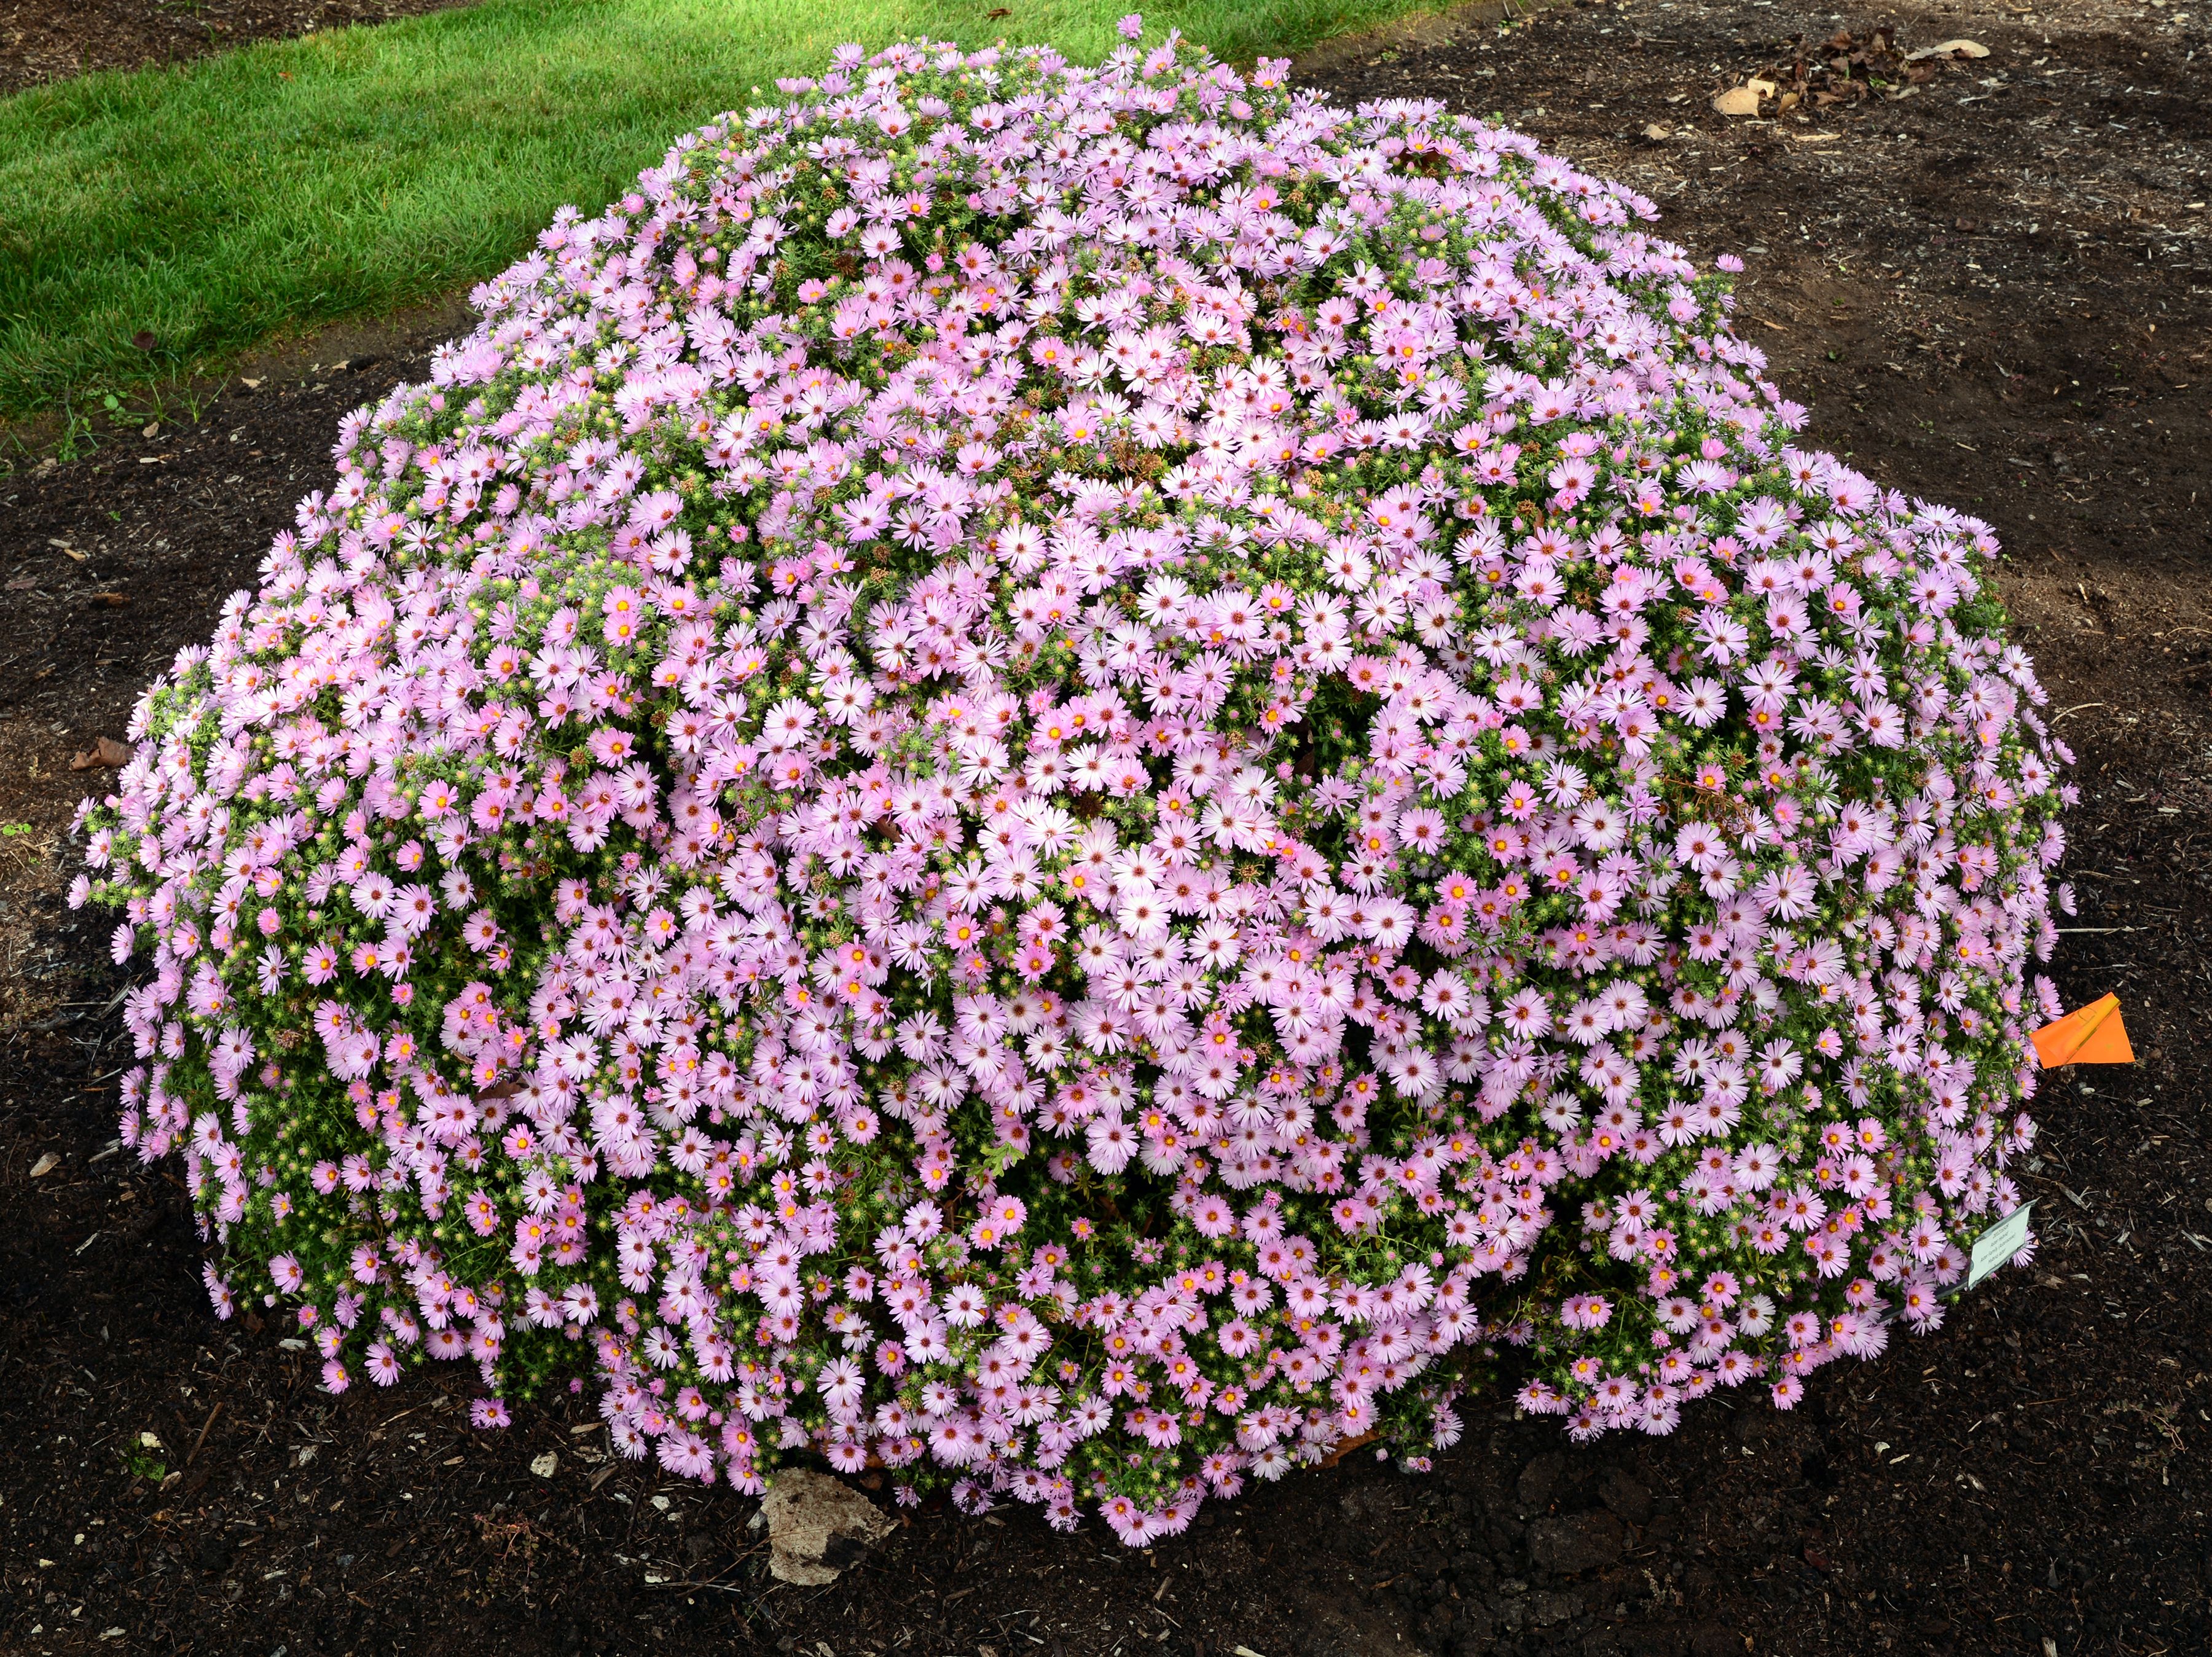 images/plants/aster/ast-billowing-pink/ast-billowing-pink-0001.jpg